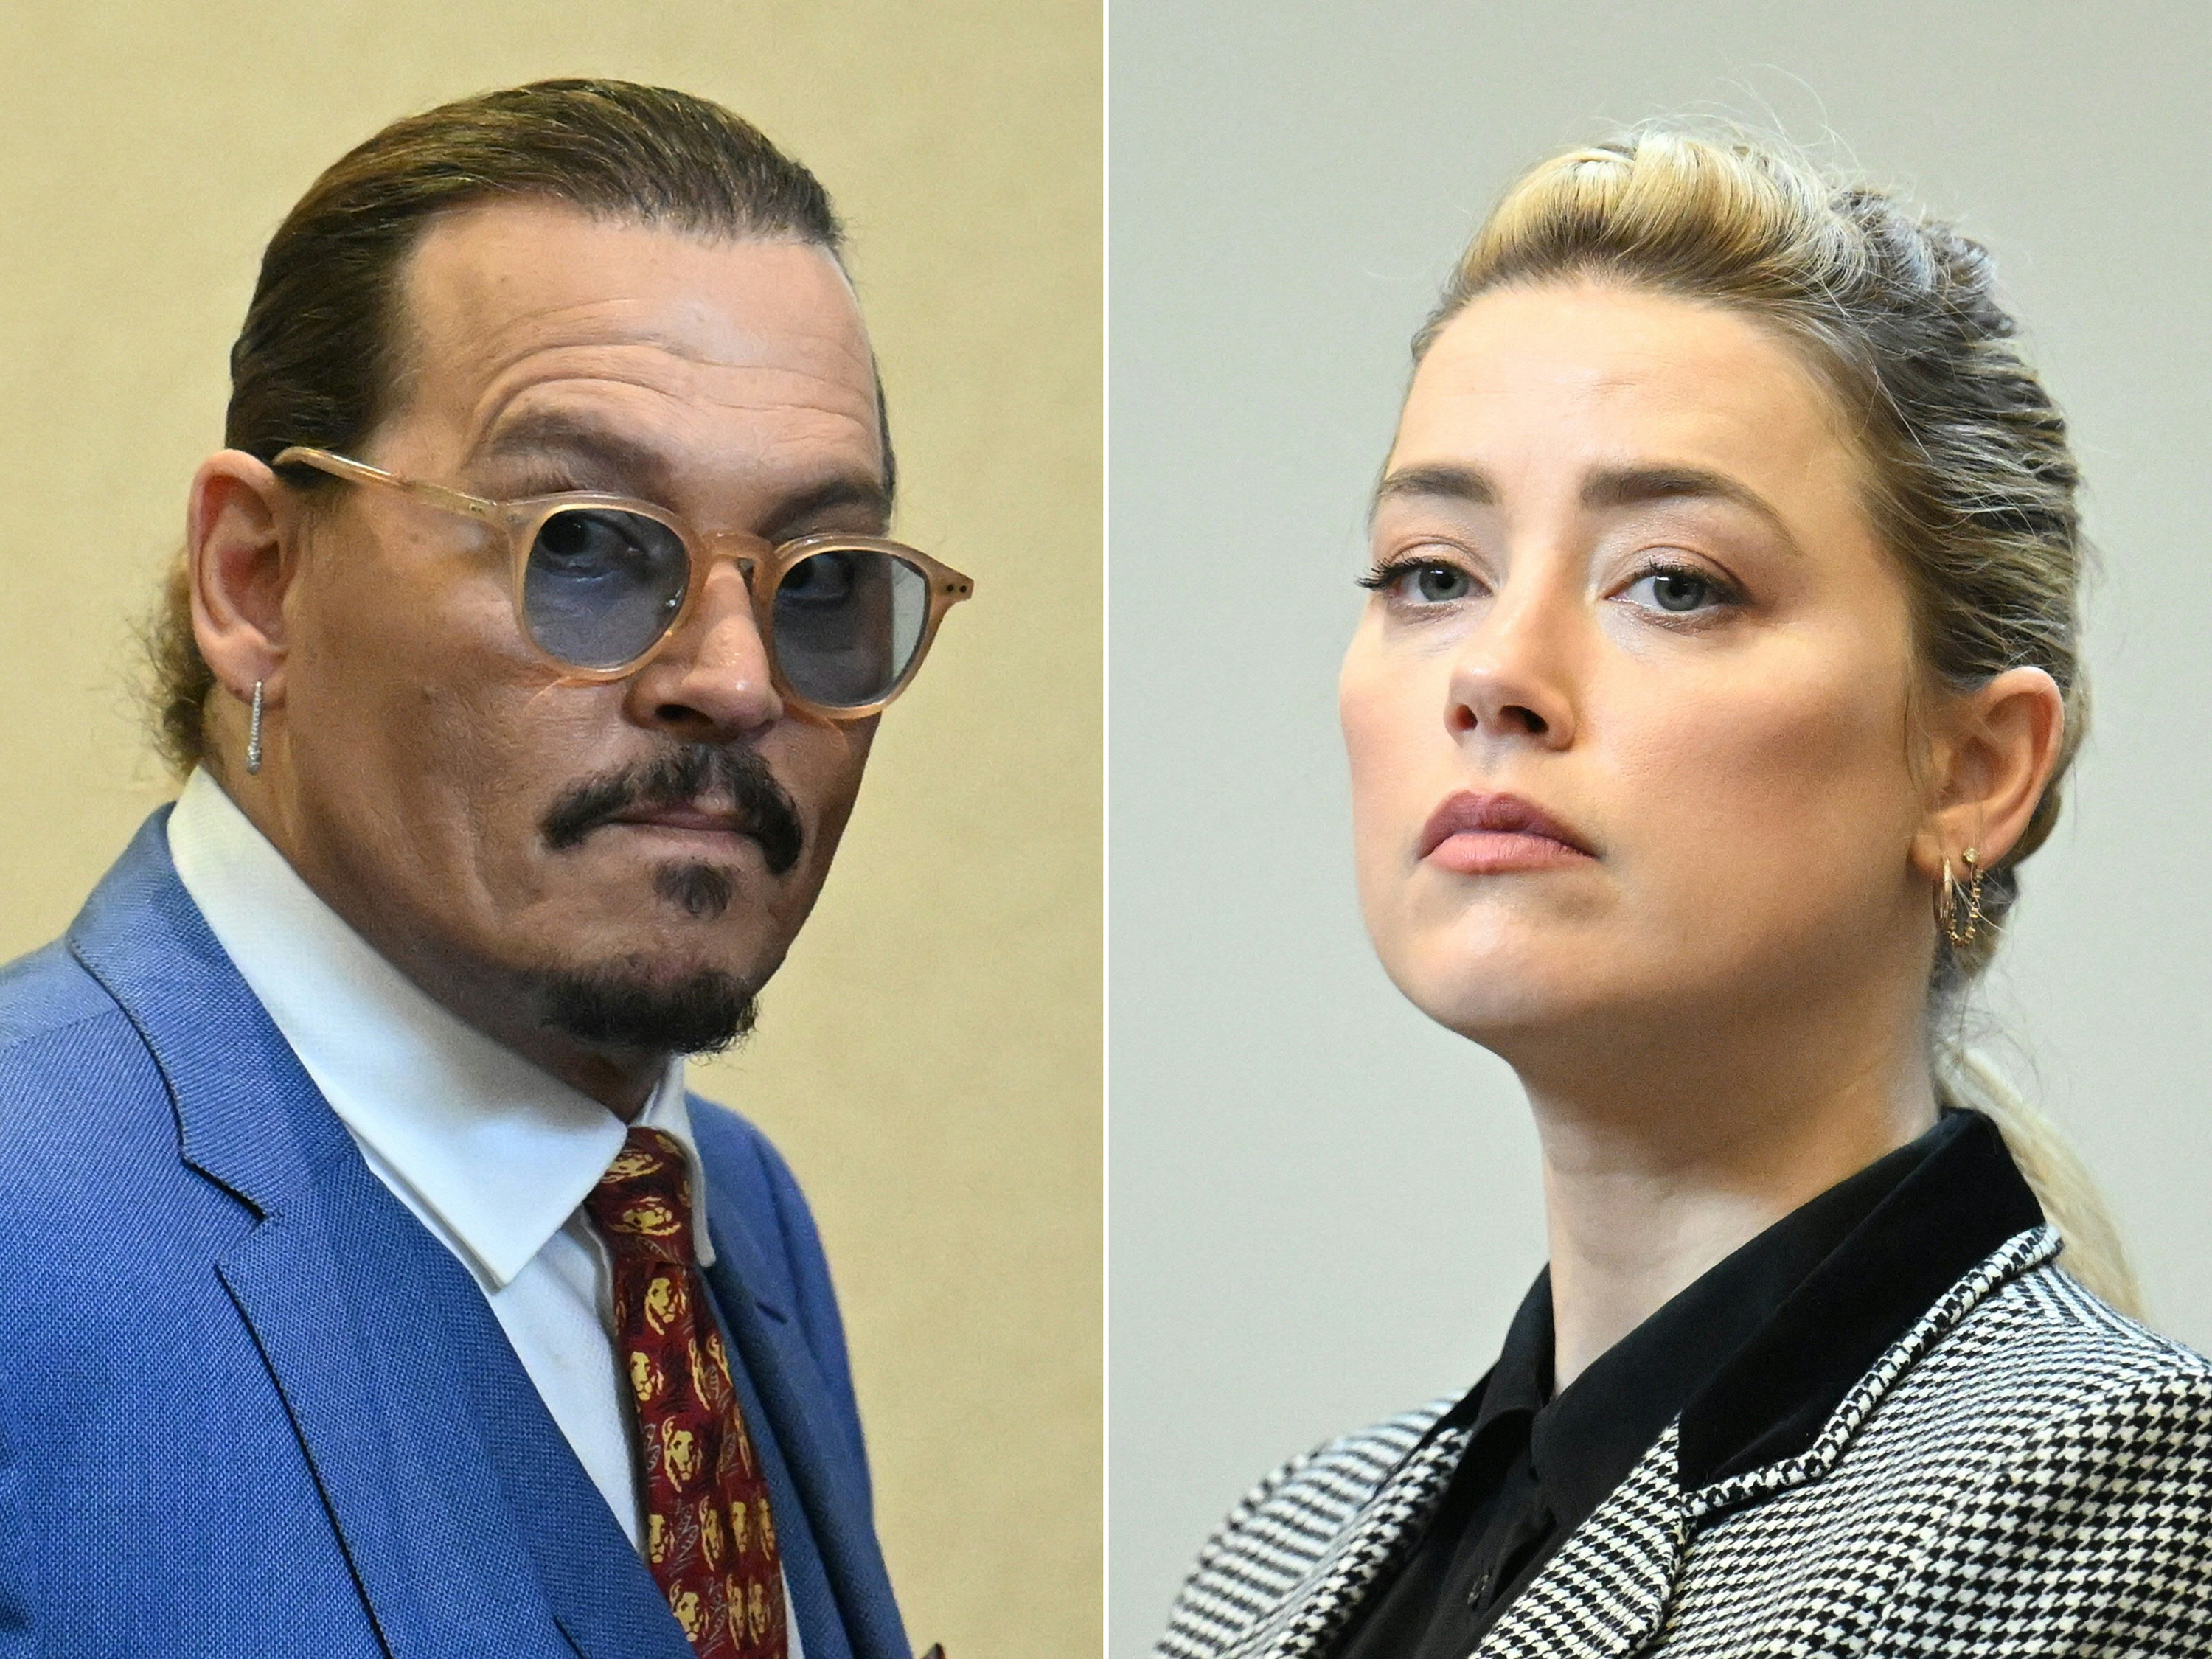 Johnny Depp and Amber Heard offered a perfect example of what mutual abuse in a romantic relationship can look like, says a relationship coach. Photo: TNS